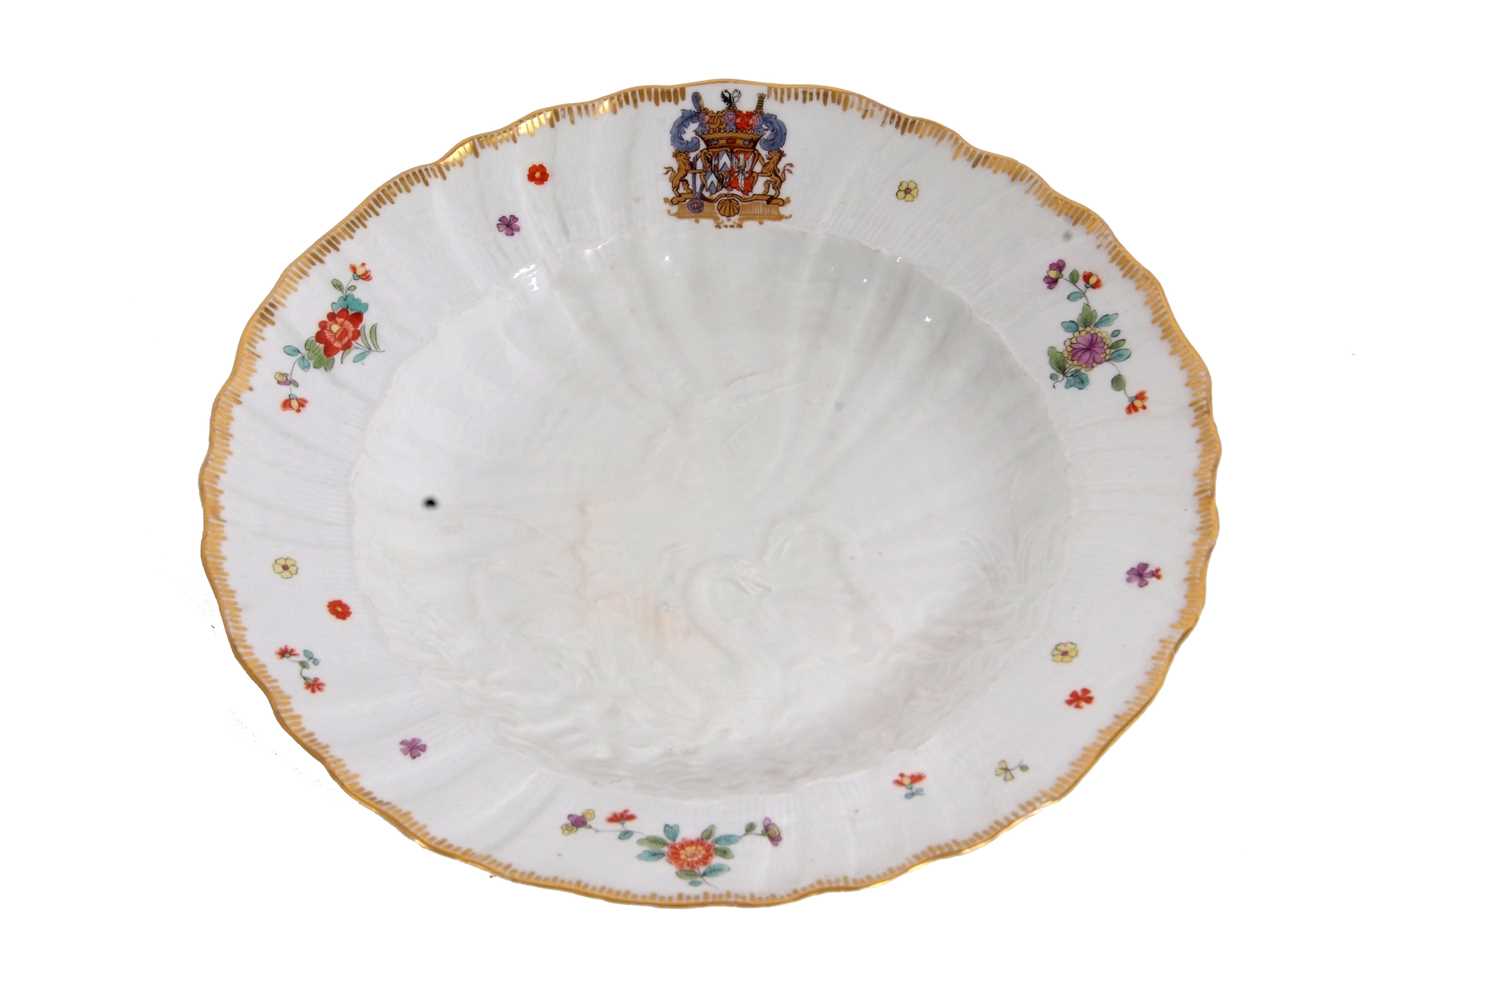 An important rare documentary Meissen plate from the swan service modelled by Kandler c.1740 the - Image 7 of 10